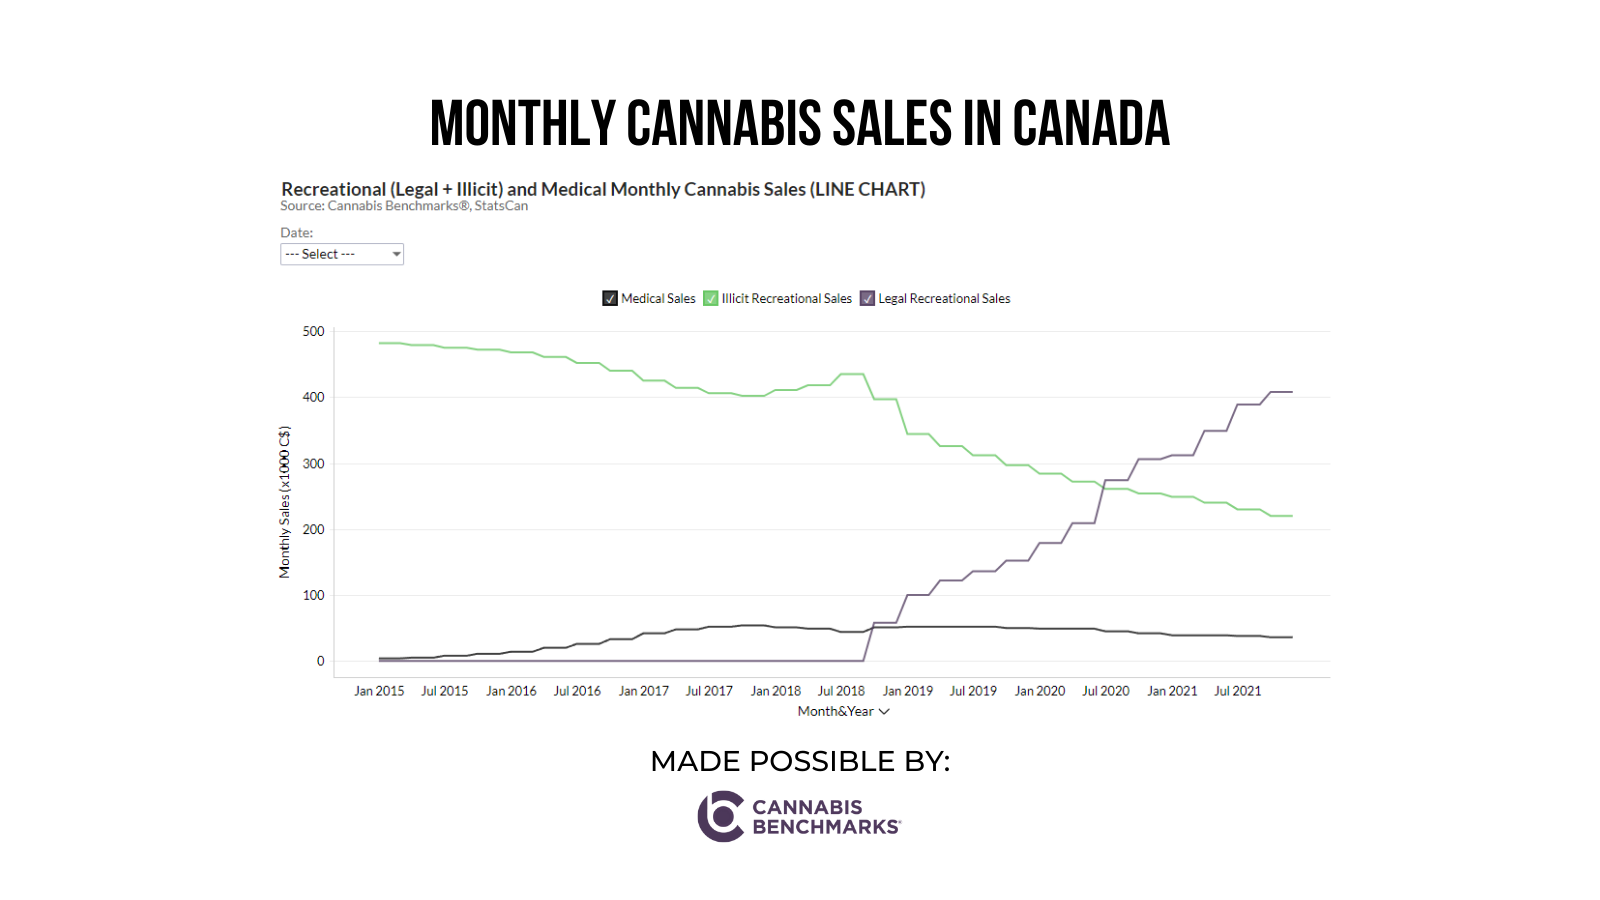 monthly cannabis sales in canada from all sources